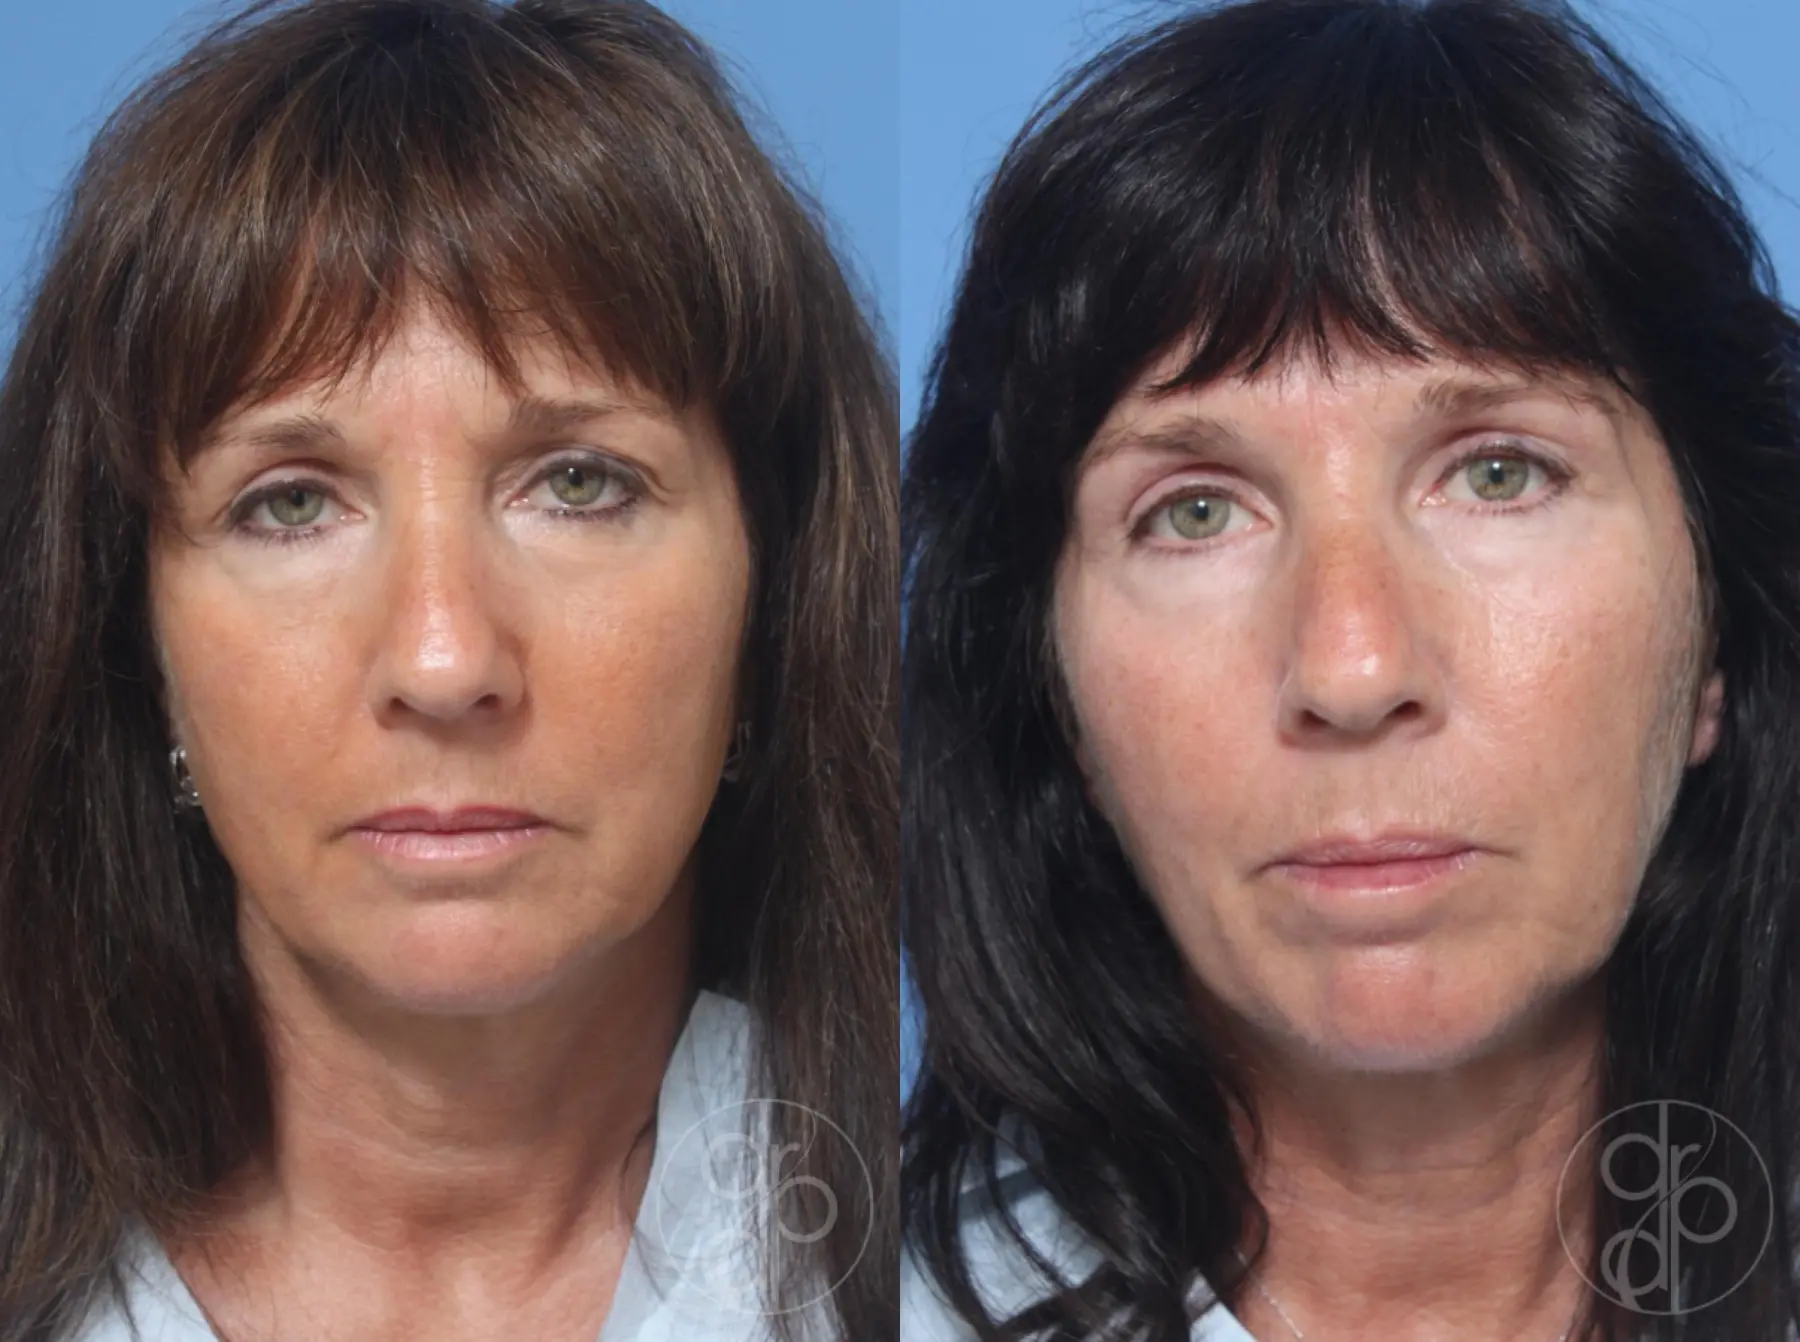 patient 11904 blepharoplasty before and after result - Before and After 1